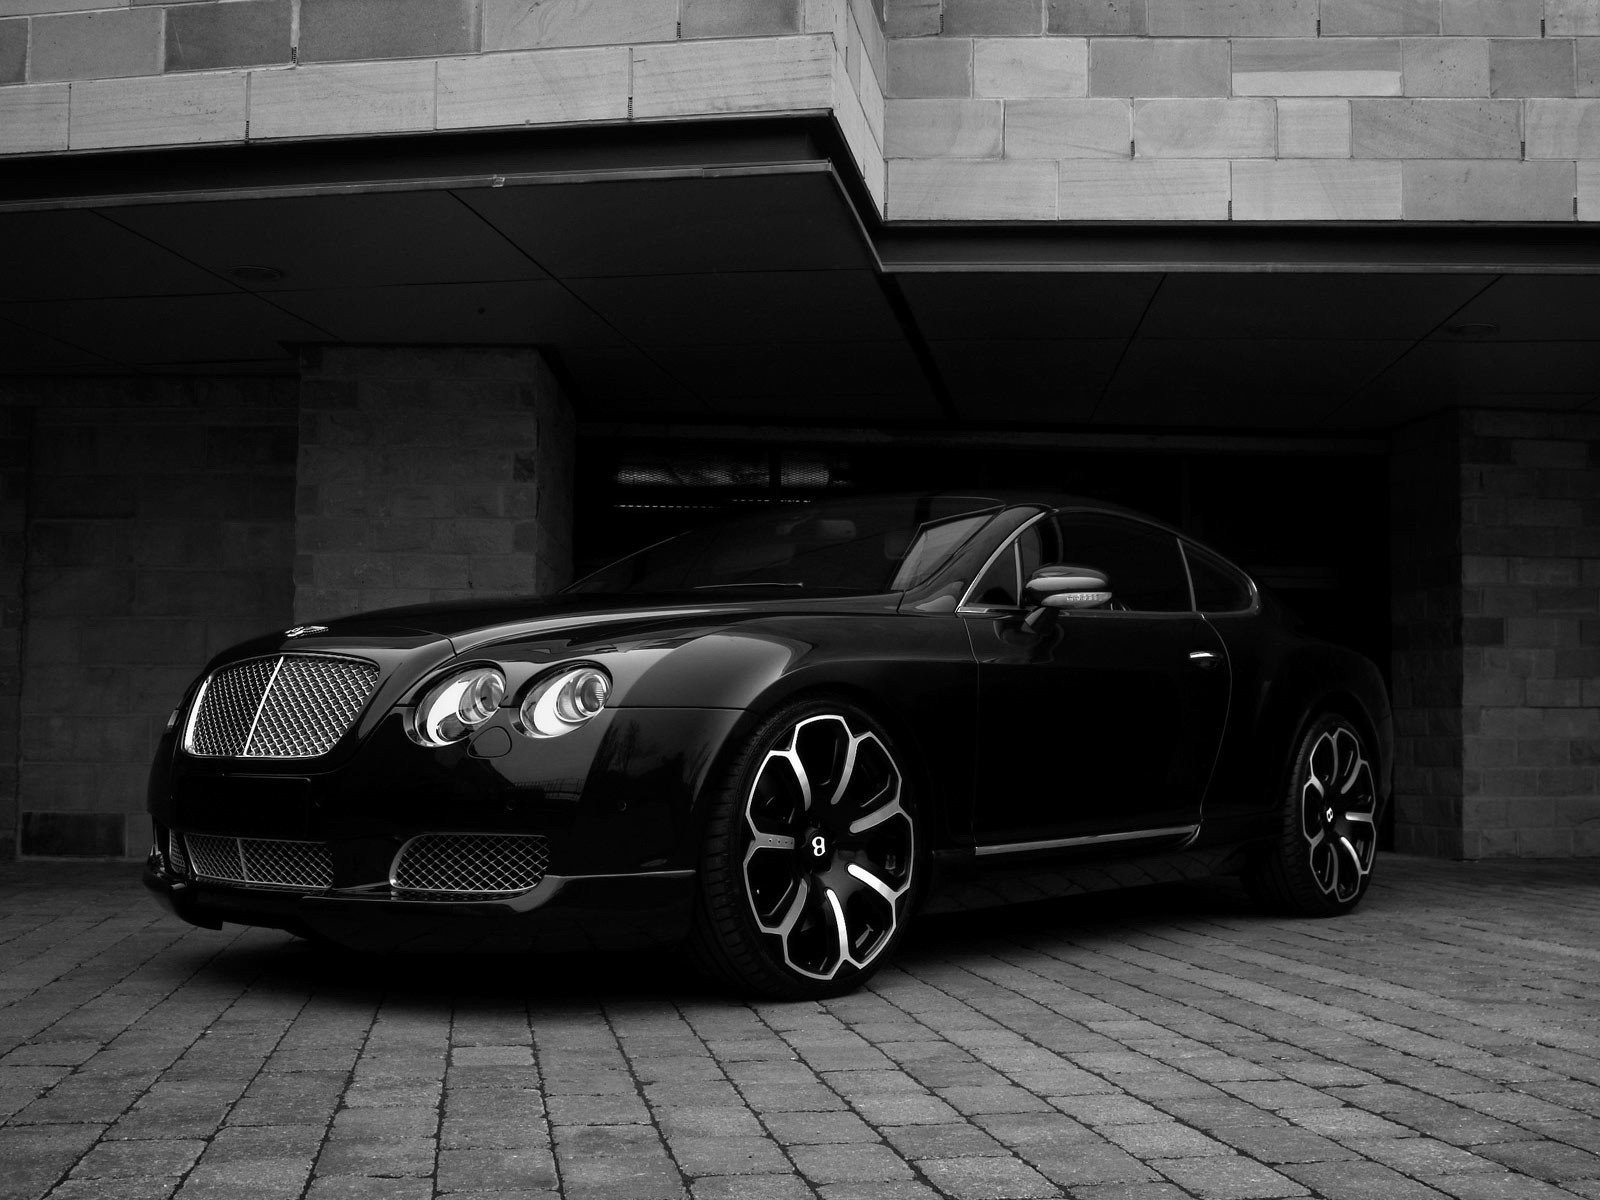 Black Bentley Front Angle for 1600 x 1200 resolution